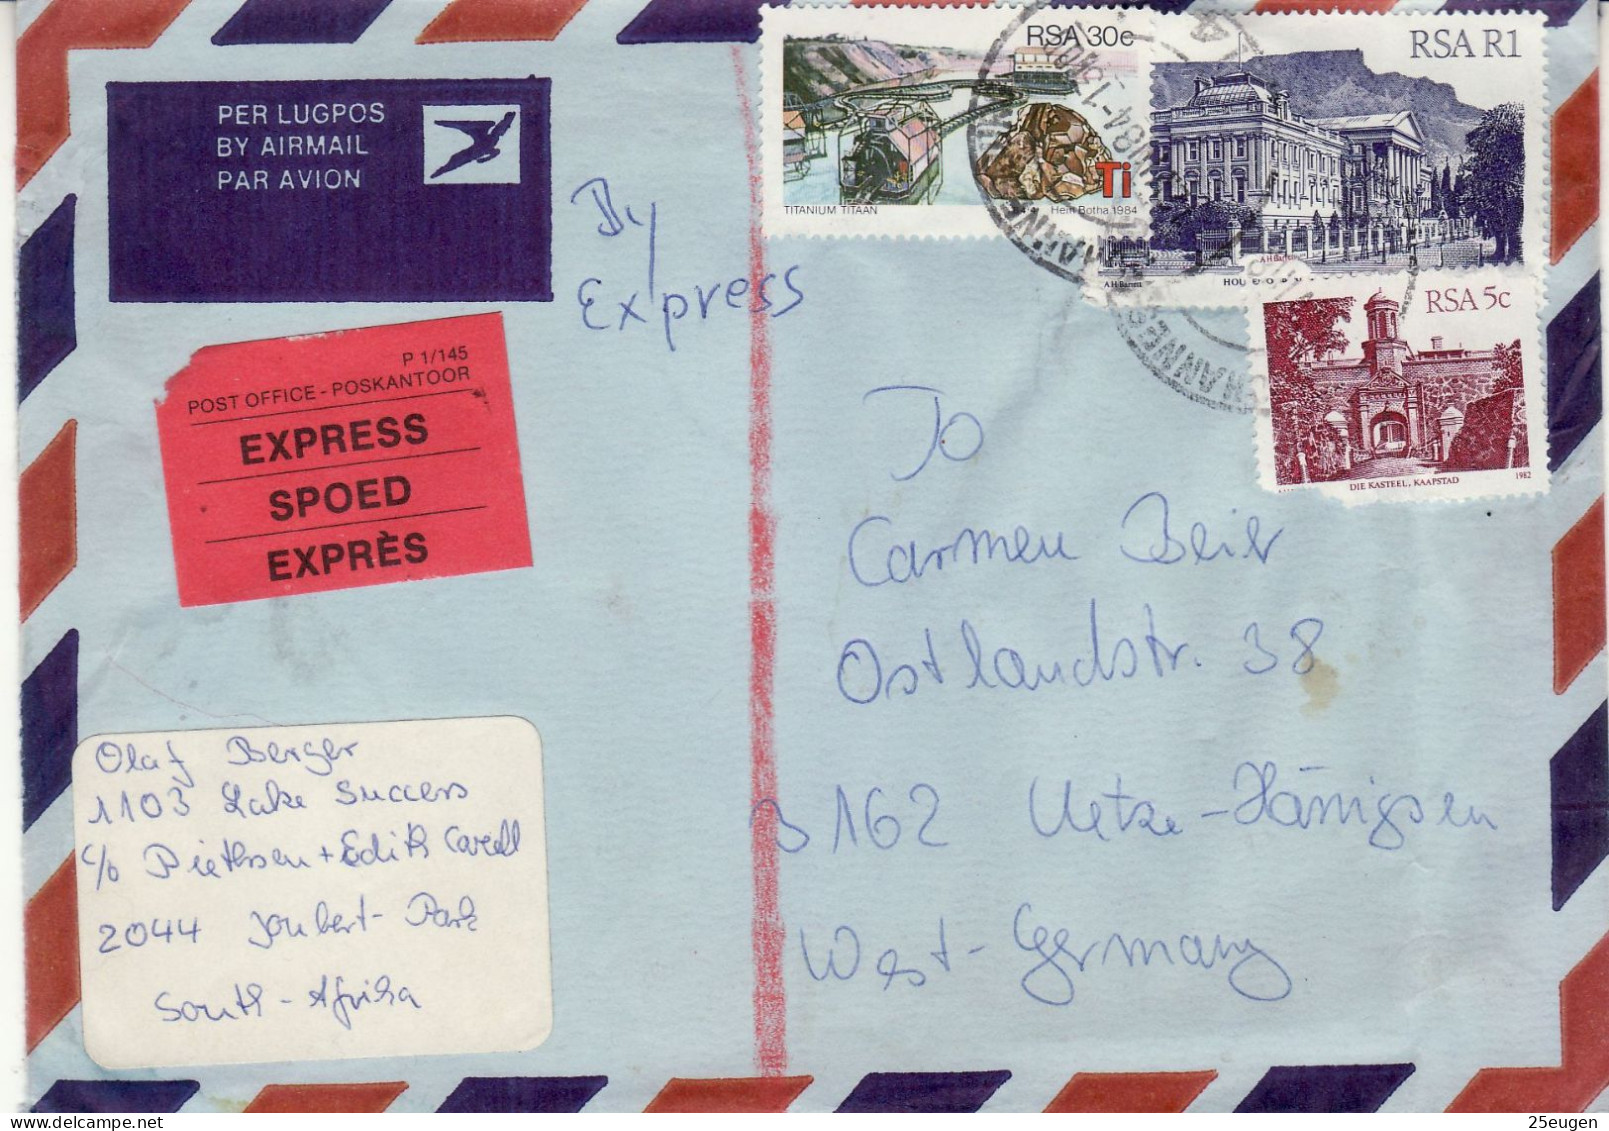 SOUTH AFRICA 1984  AIRMAIL LETTER SENT TO GERMANY - Briefe U. Dokumente